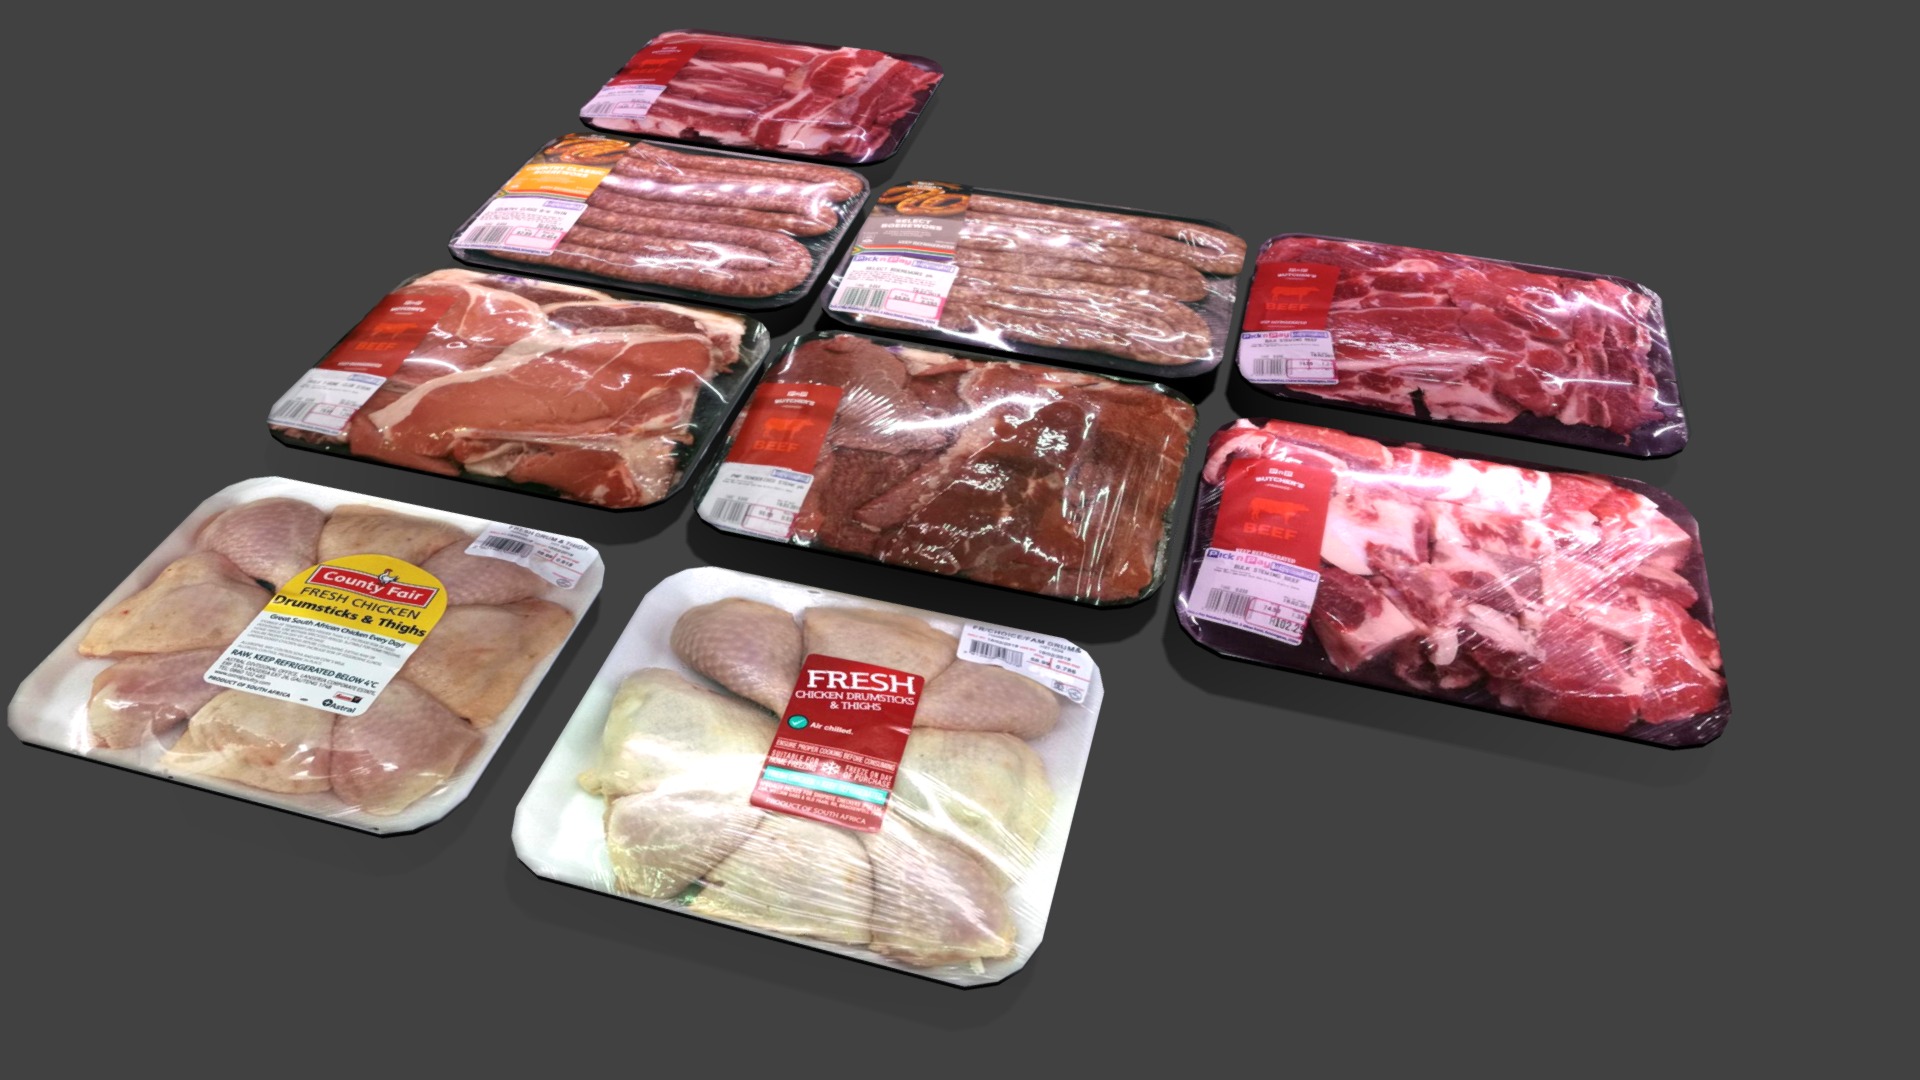 3D model Cold Area Meat Section kit for shop or store - This is a 3D model of the Cold Area Meat Section kit for shop or store. The 3D model is about a group of packages of meat.